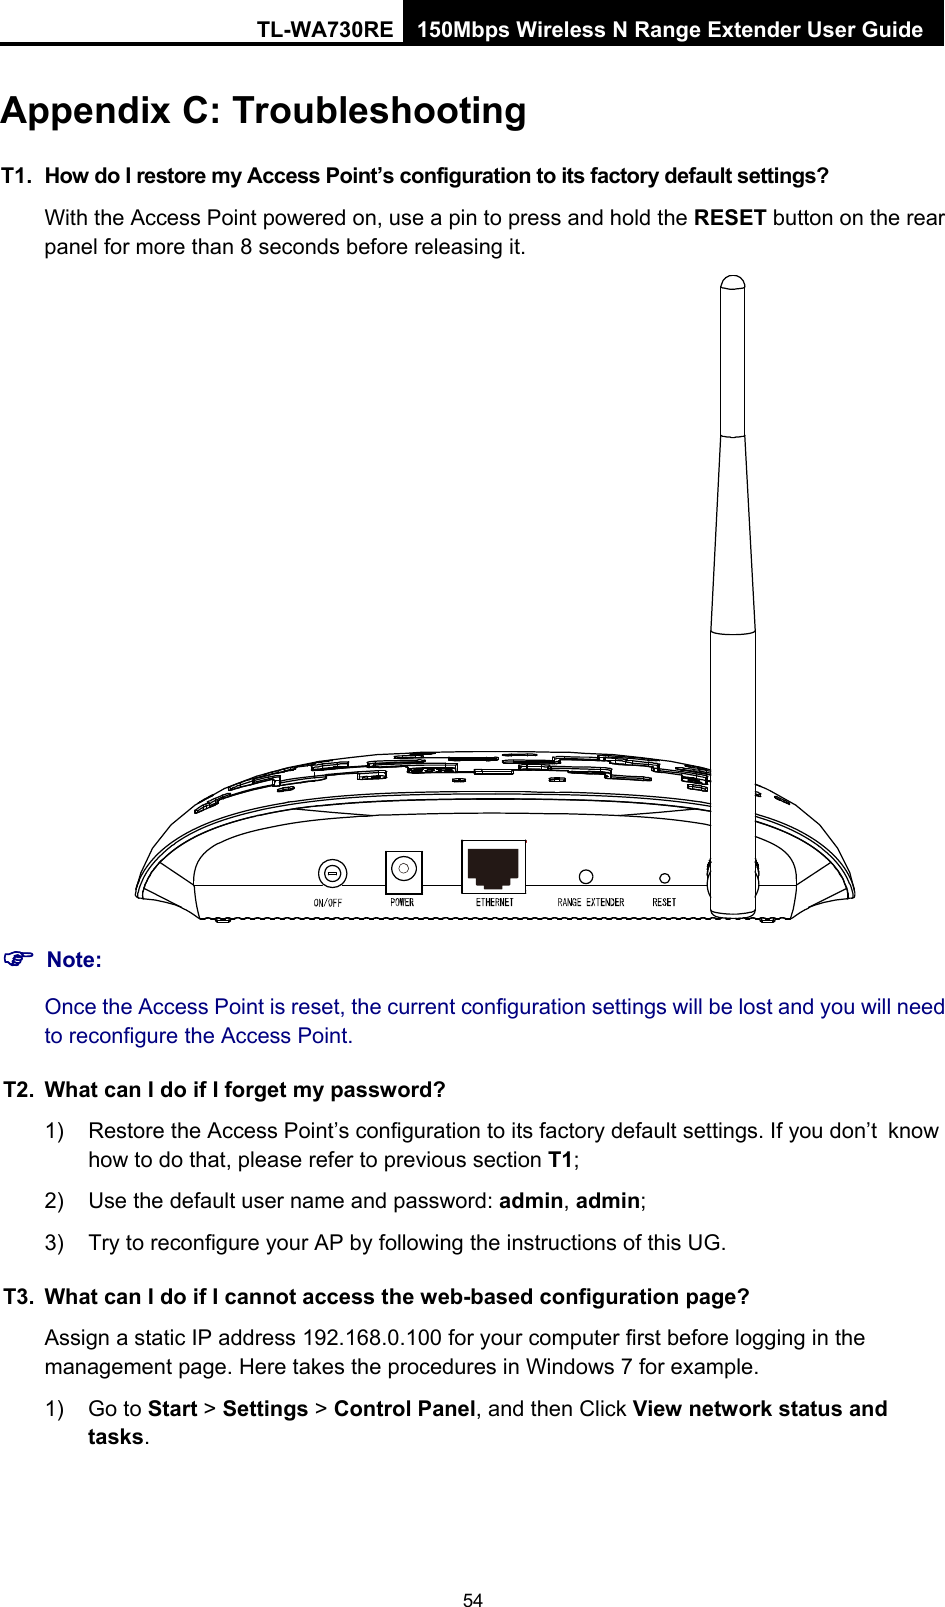 TL-WA730RE 150Mbps Wireless N Range Extender User Guide Appendix C: Troubleshooting T1.  How do I restore my Access Point’s configuration to its factory default settings? With the Access Point powered on, use a pin to press and hold the RESET button on the rear panel for more than 8 seconds before releasing it.  ) Note: Once the Access Point is reset, the current configuration settings will be lost and you will need to reconfigure the Access Point. T2.  What can I do if I forget my password? 1)  Restore the Access Point’s configuration to its factory default settings. If you don’t know how to do that, please refer to previous section T1; 2)  Use the default user name and password: admin, admin; 3)  Try to reconfigure your AP by following the instructions of this UG. T3.  What can I do if I cannot access the web-based configuration page? Assign a static IP address 192.168.0.100 for your computer first before logging in the management page. Here takes the procedures in Windows 7 for example. 1) Go to Start &gt; Settings &gt; Control Panel, and then Click View network status and tasks. 54 